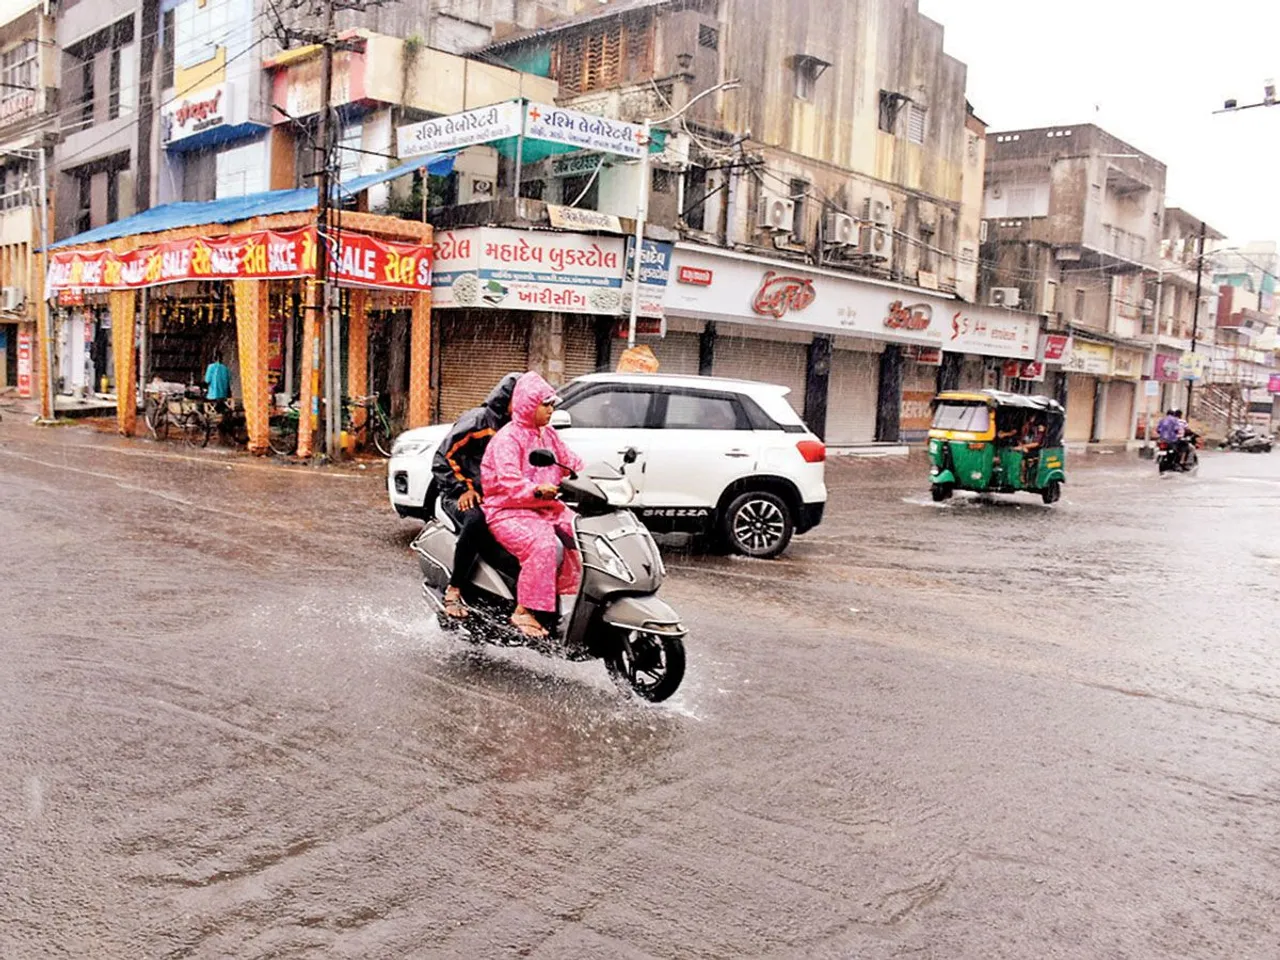 Heavy rains pound parts of Gujarat on 2nd day; roads flooded, high alert for 37 reservoirs as rivers swell